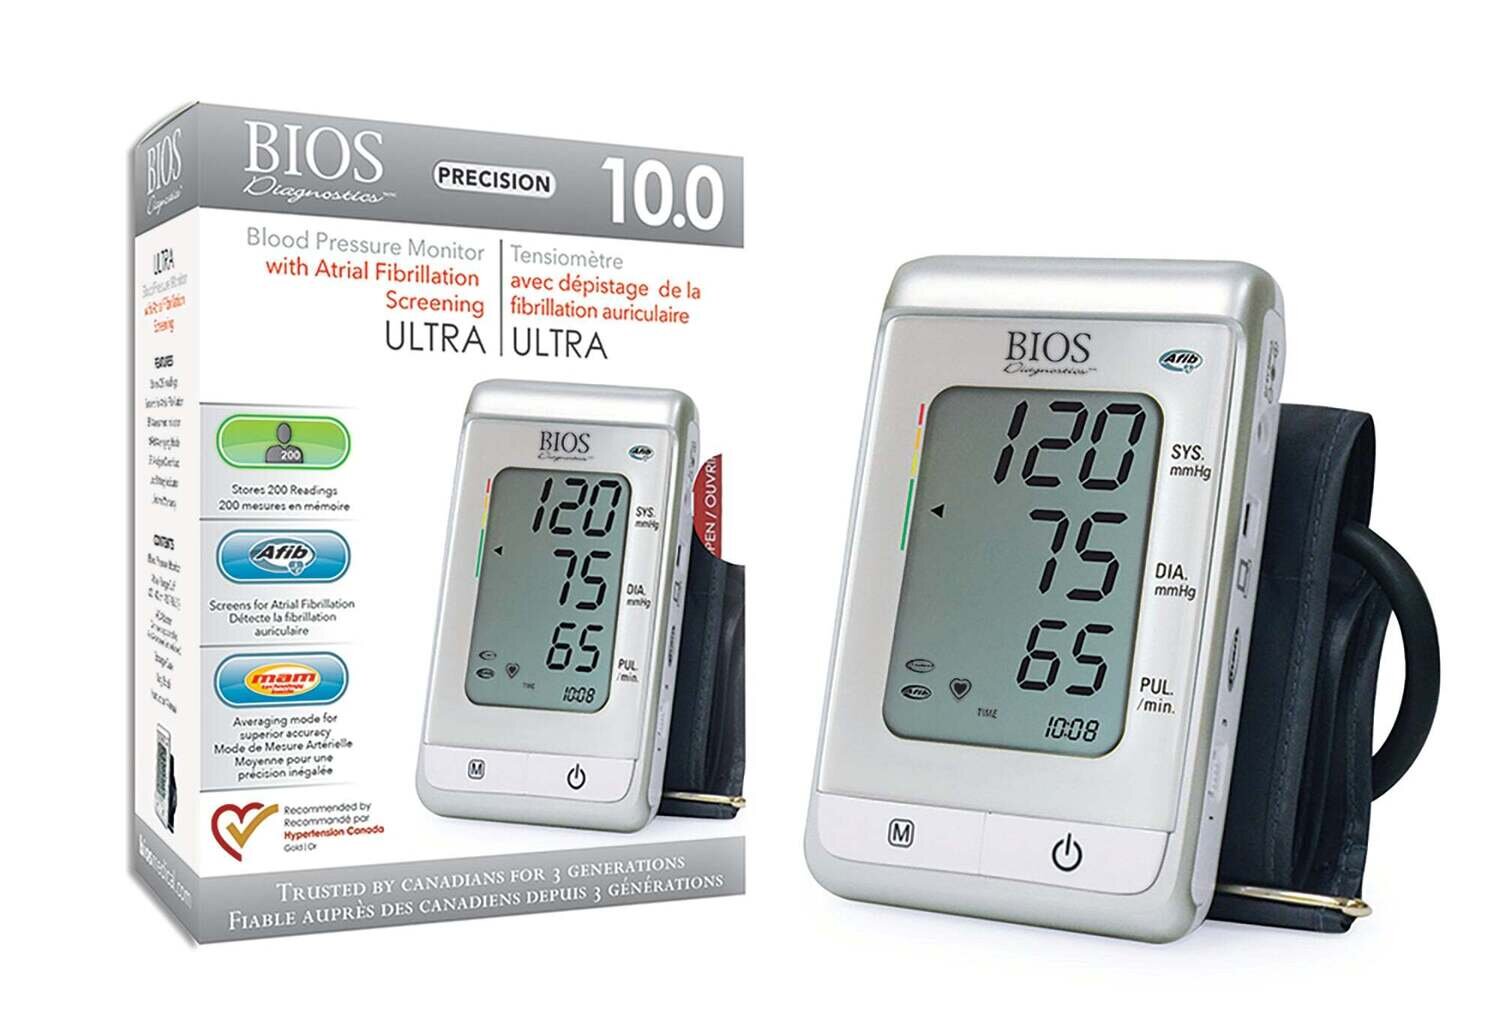 Ultra Blood Pressure Monitor with AFIB Screening (Precision 10.0)